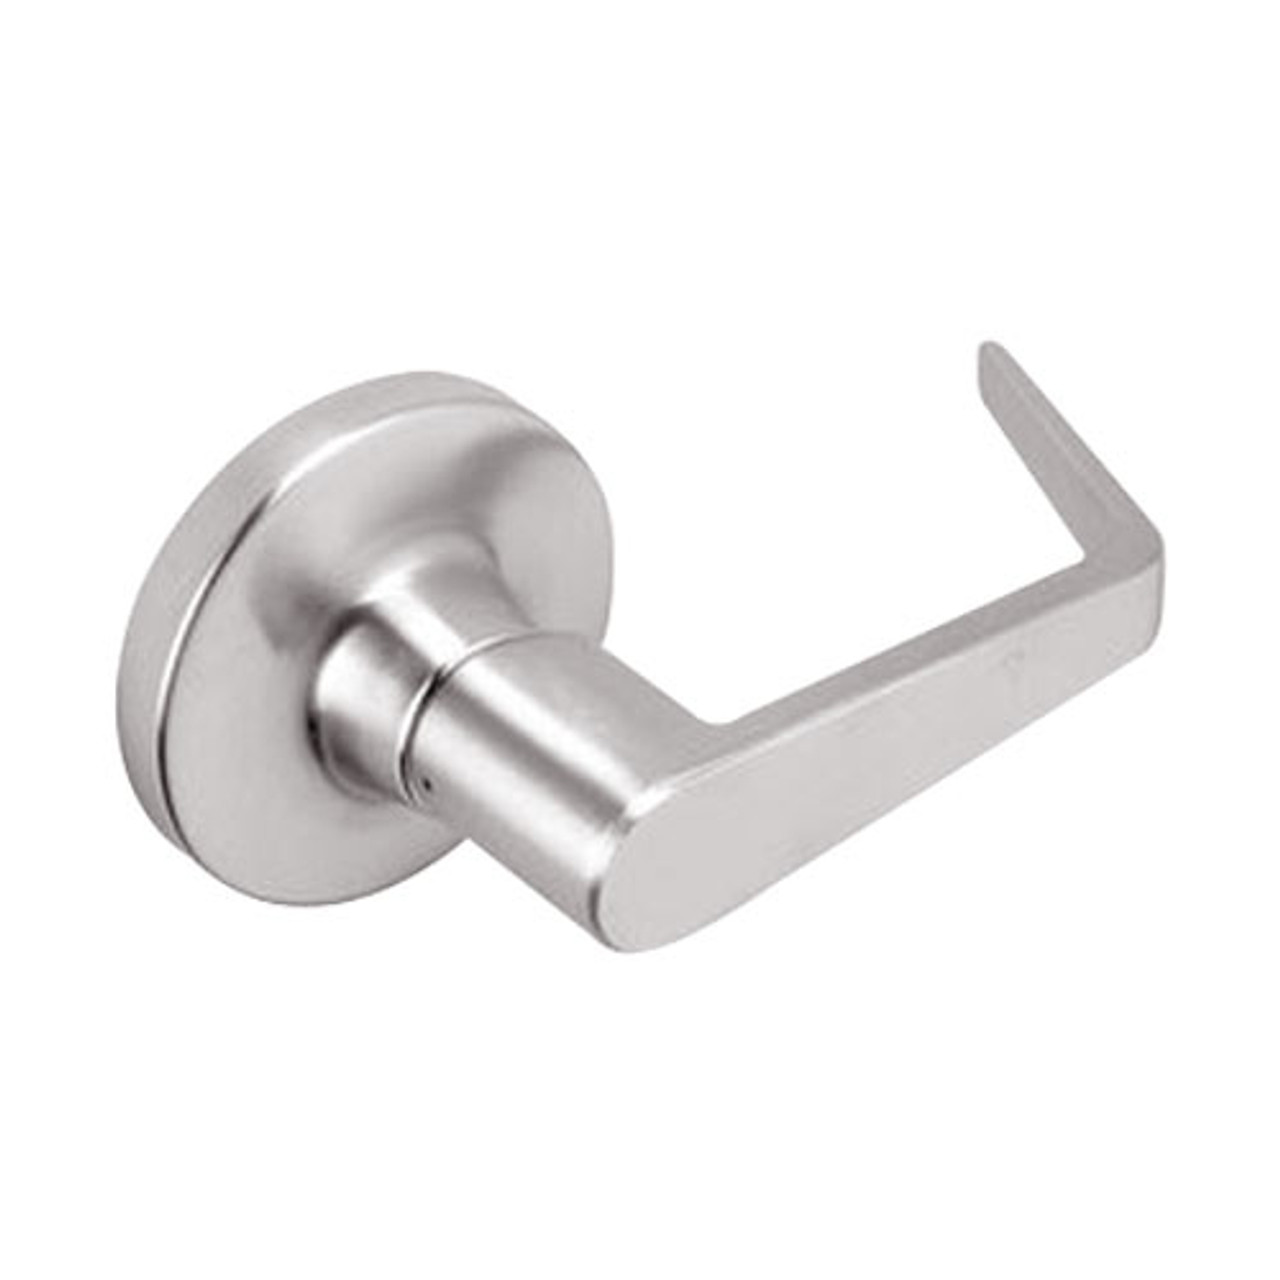 MA301-DG-630 Falcon Mortise Locks MA Series Privacy with DG Lever in Satin Stainless Finish